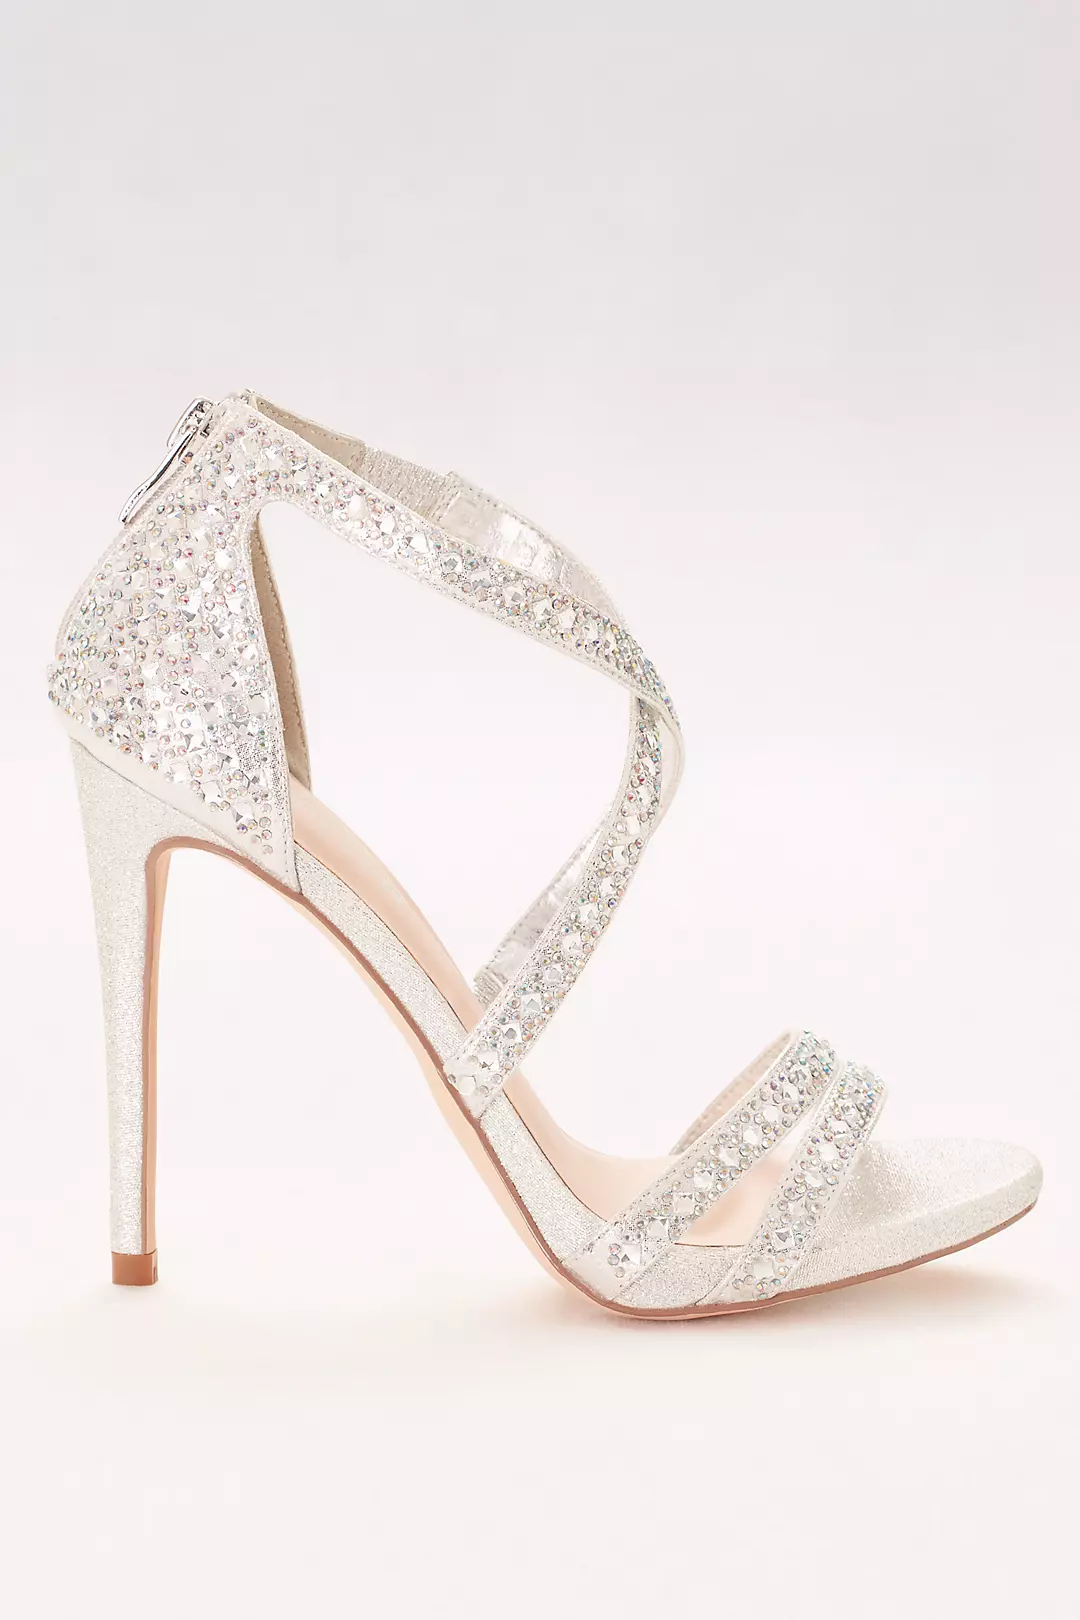 Crisscross Strappy Heels with Crystals Image 3